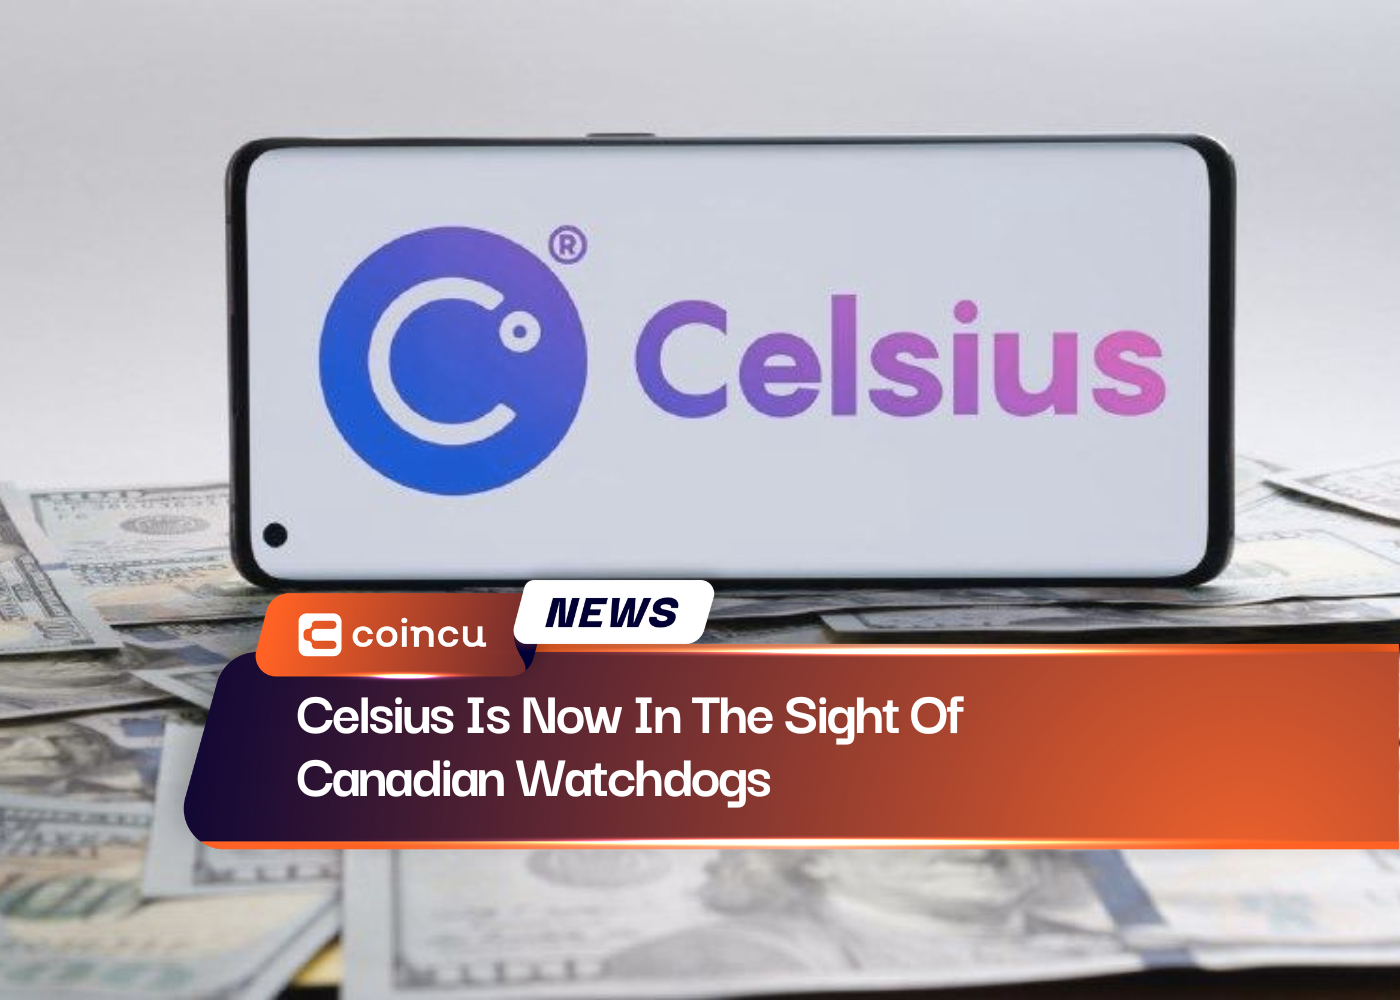 Celsius Is Now In The Sight Of Canadian Watchdogs